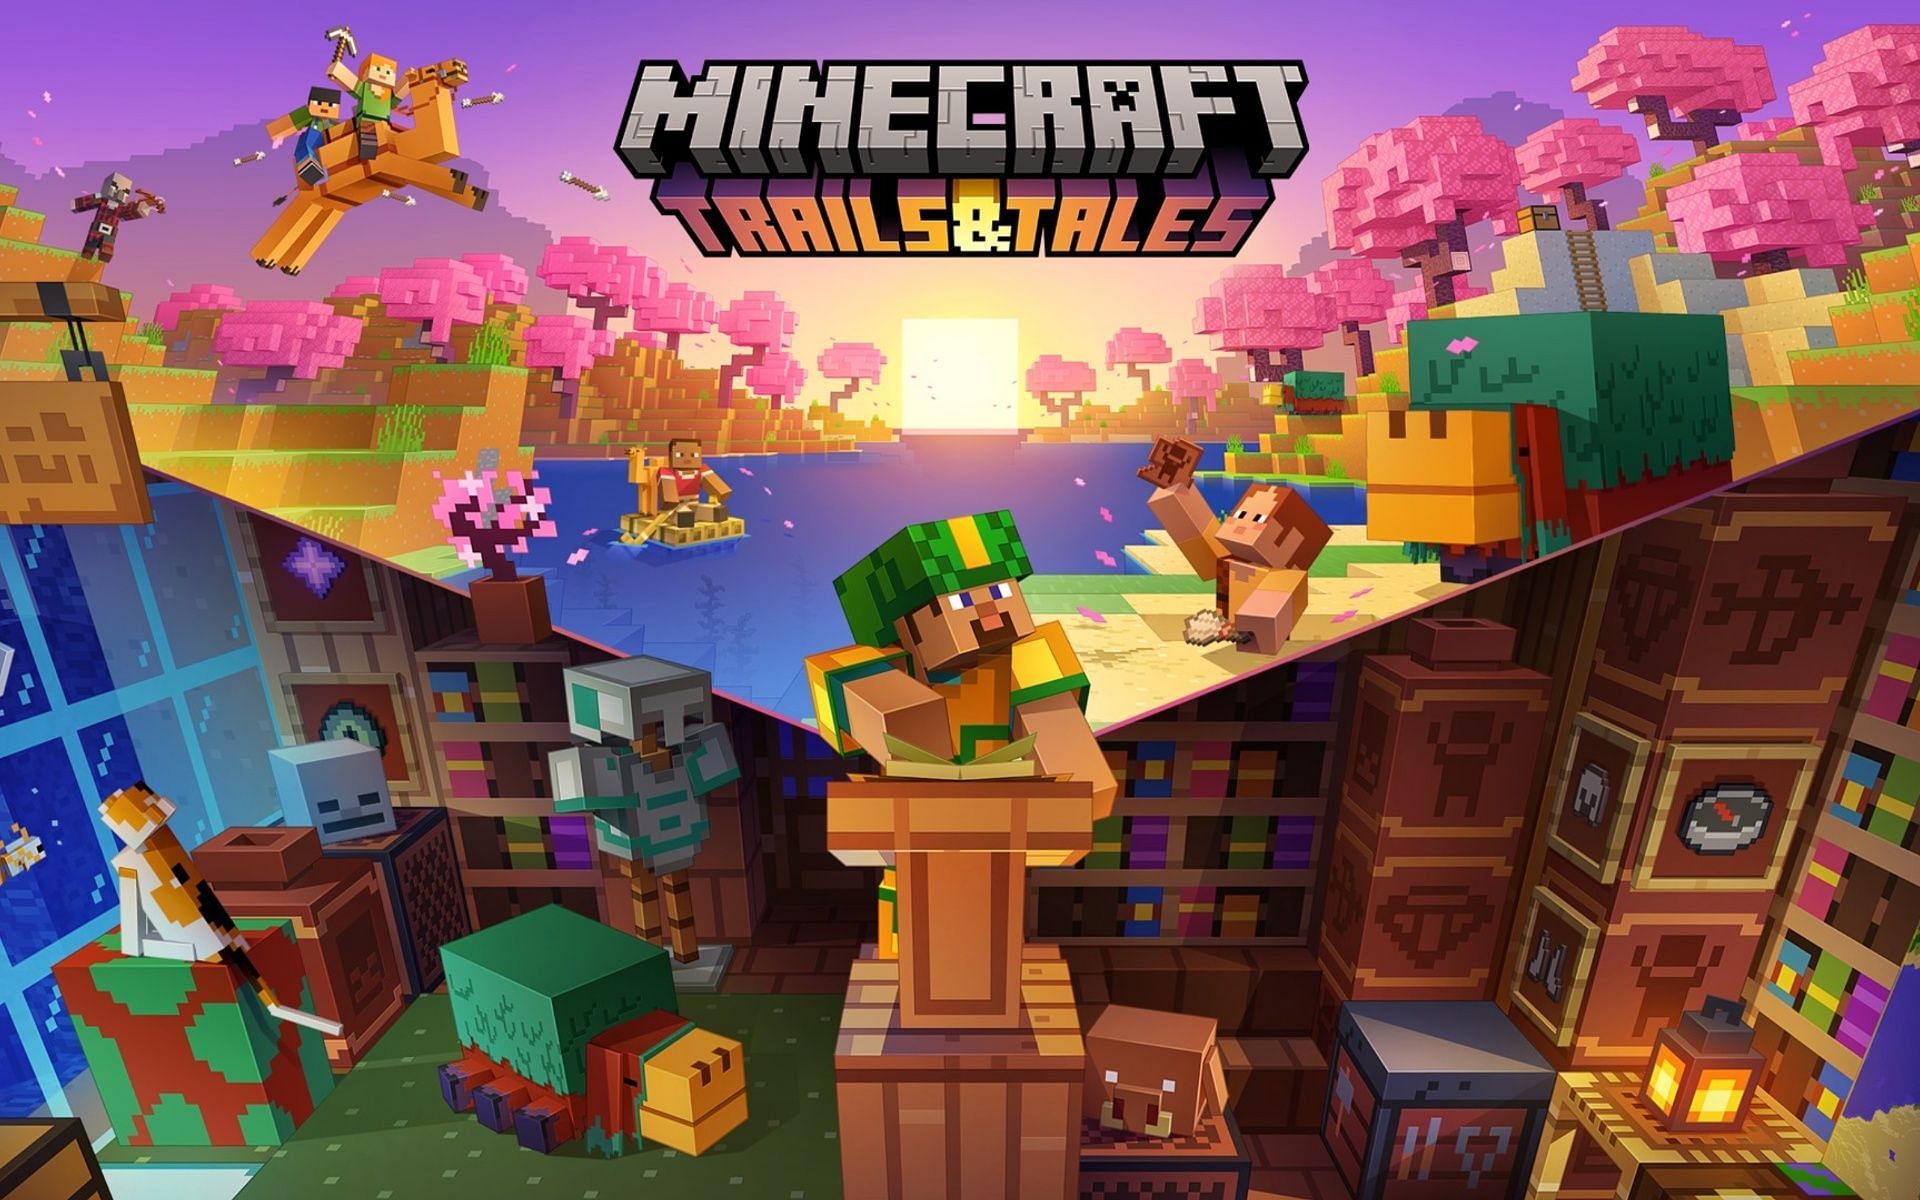 Minecraft 1.20 Trails & Tales update APK download file to be